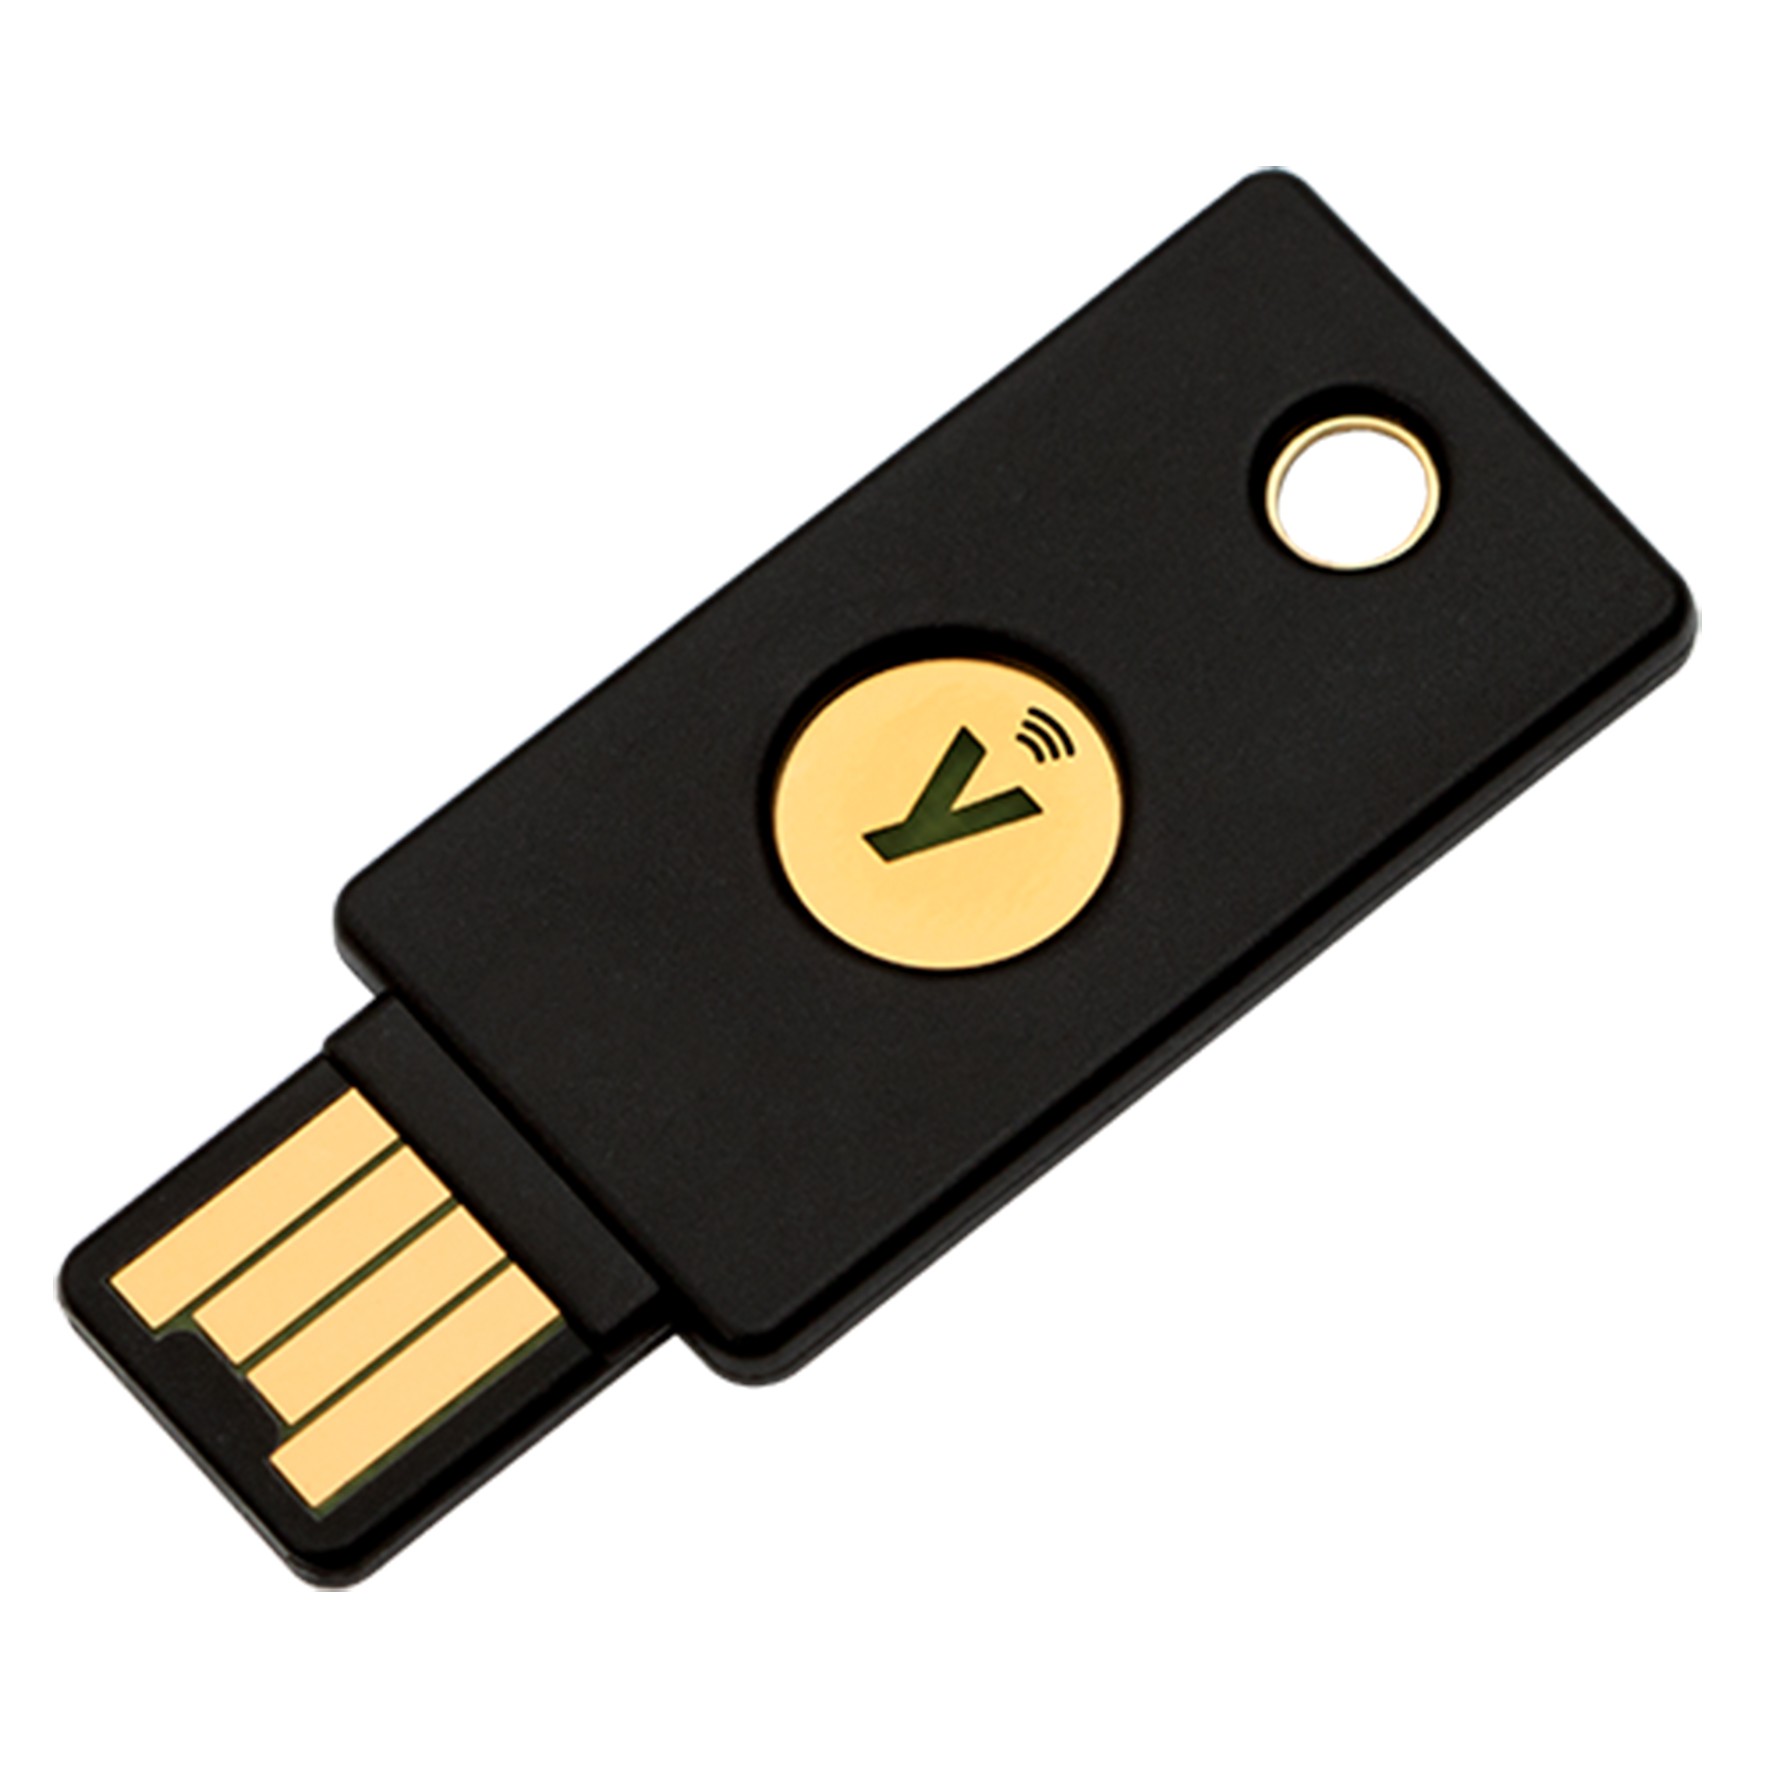 The YubiKey is a two-factor hardware dongle that verifies your identity through a physical USB-like device for greater security.